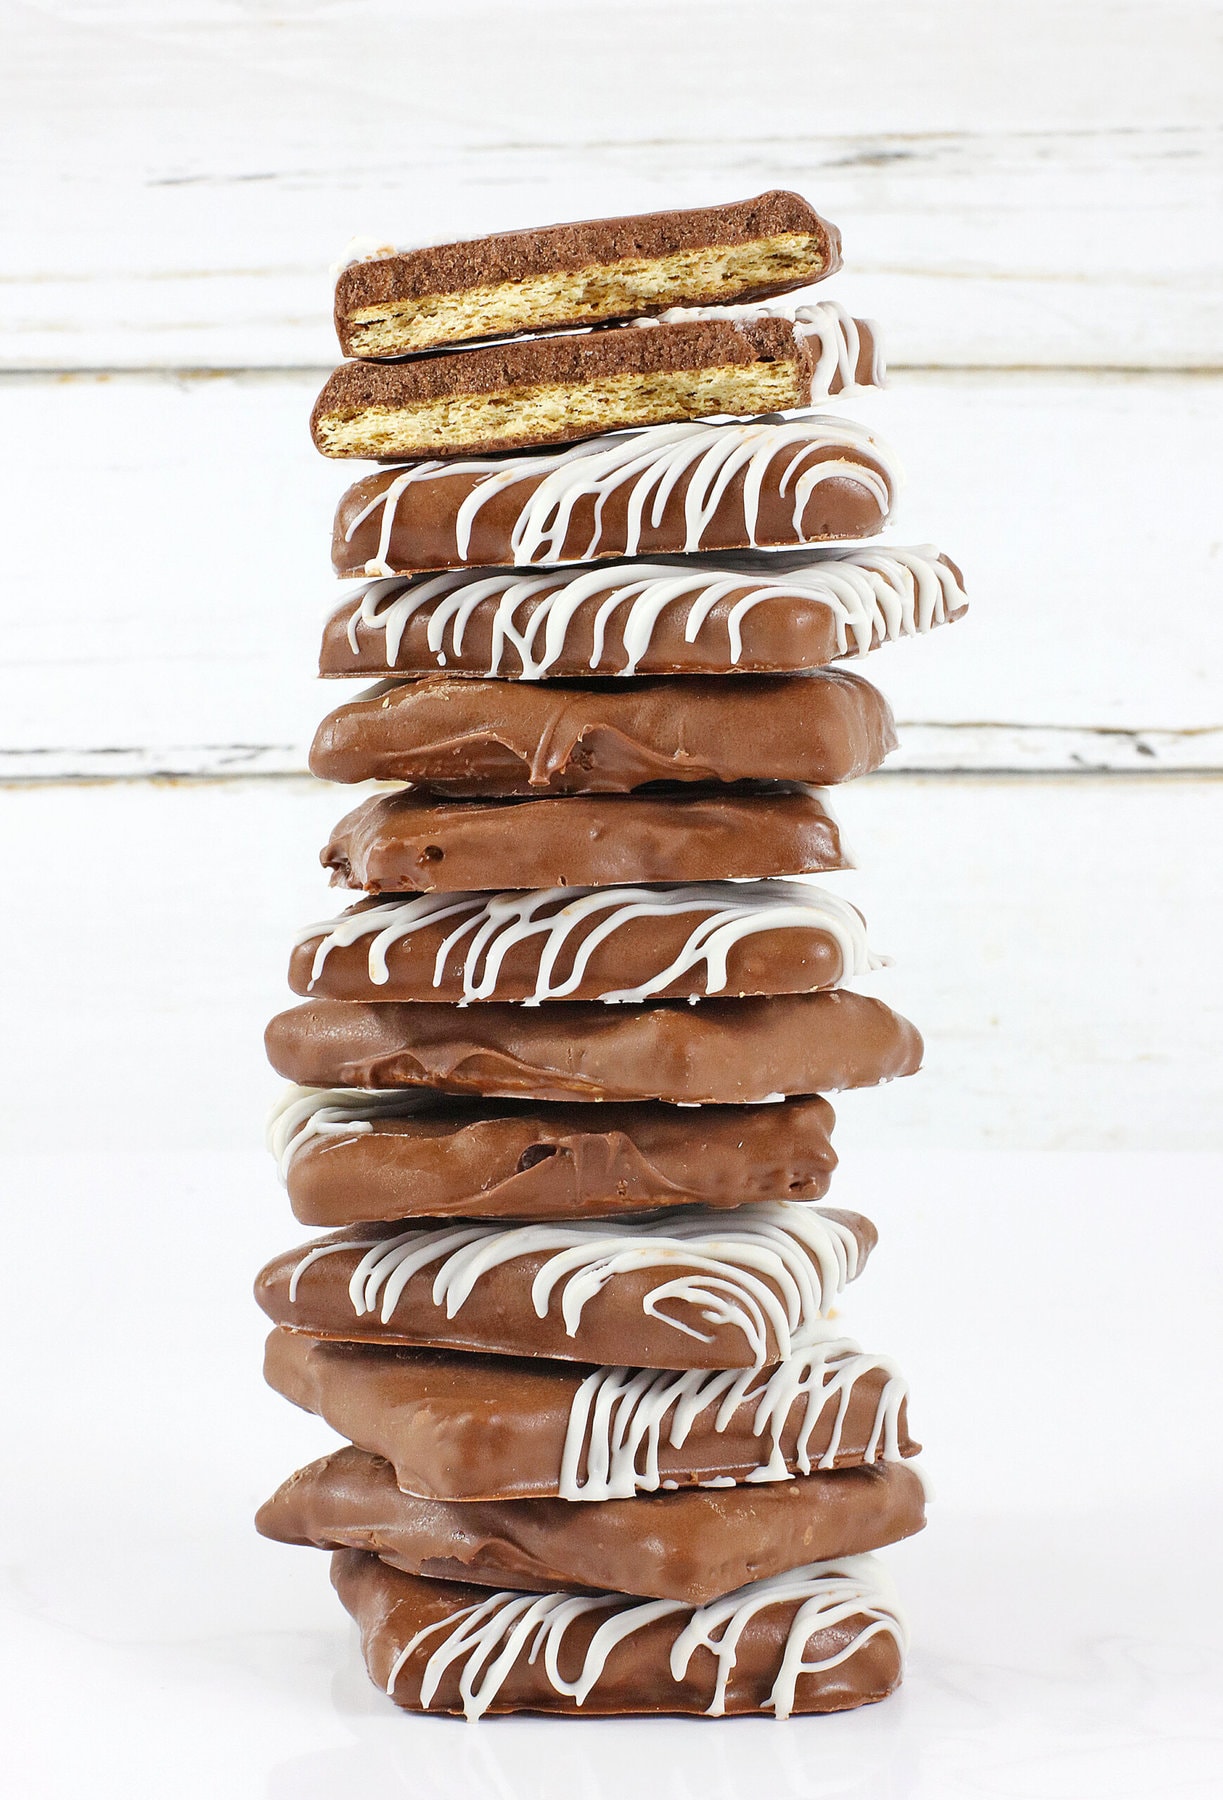 A large stack of Chocolate Covered Graham Crackers.